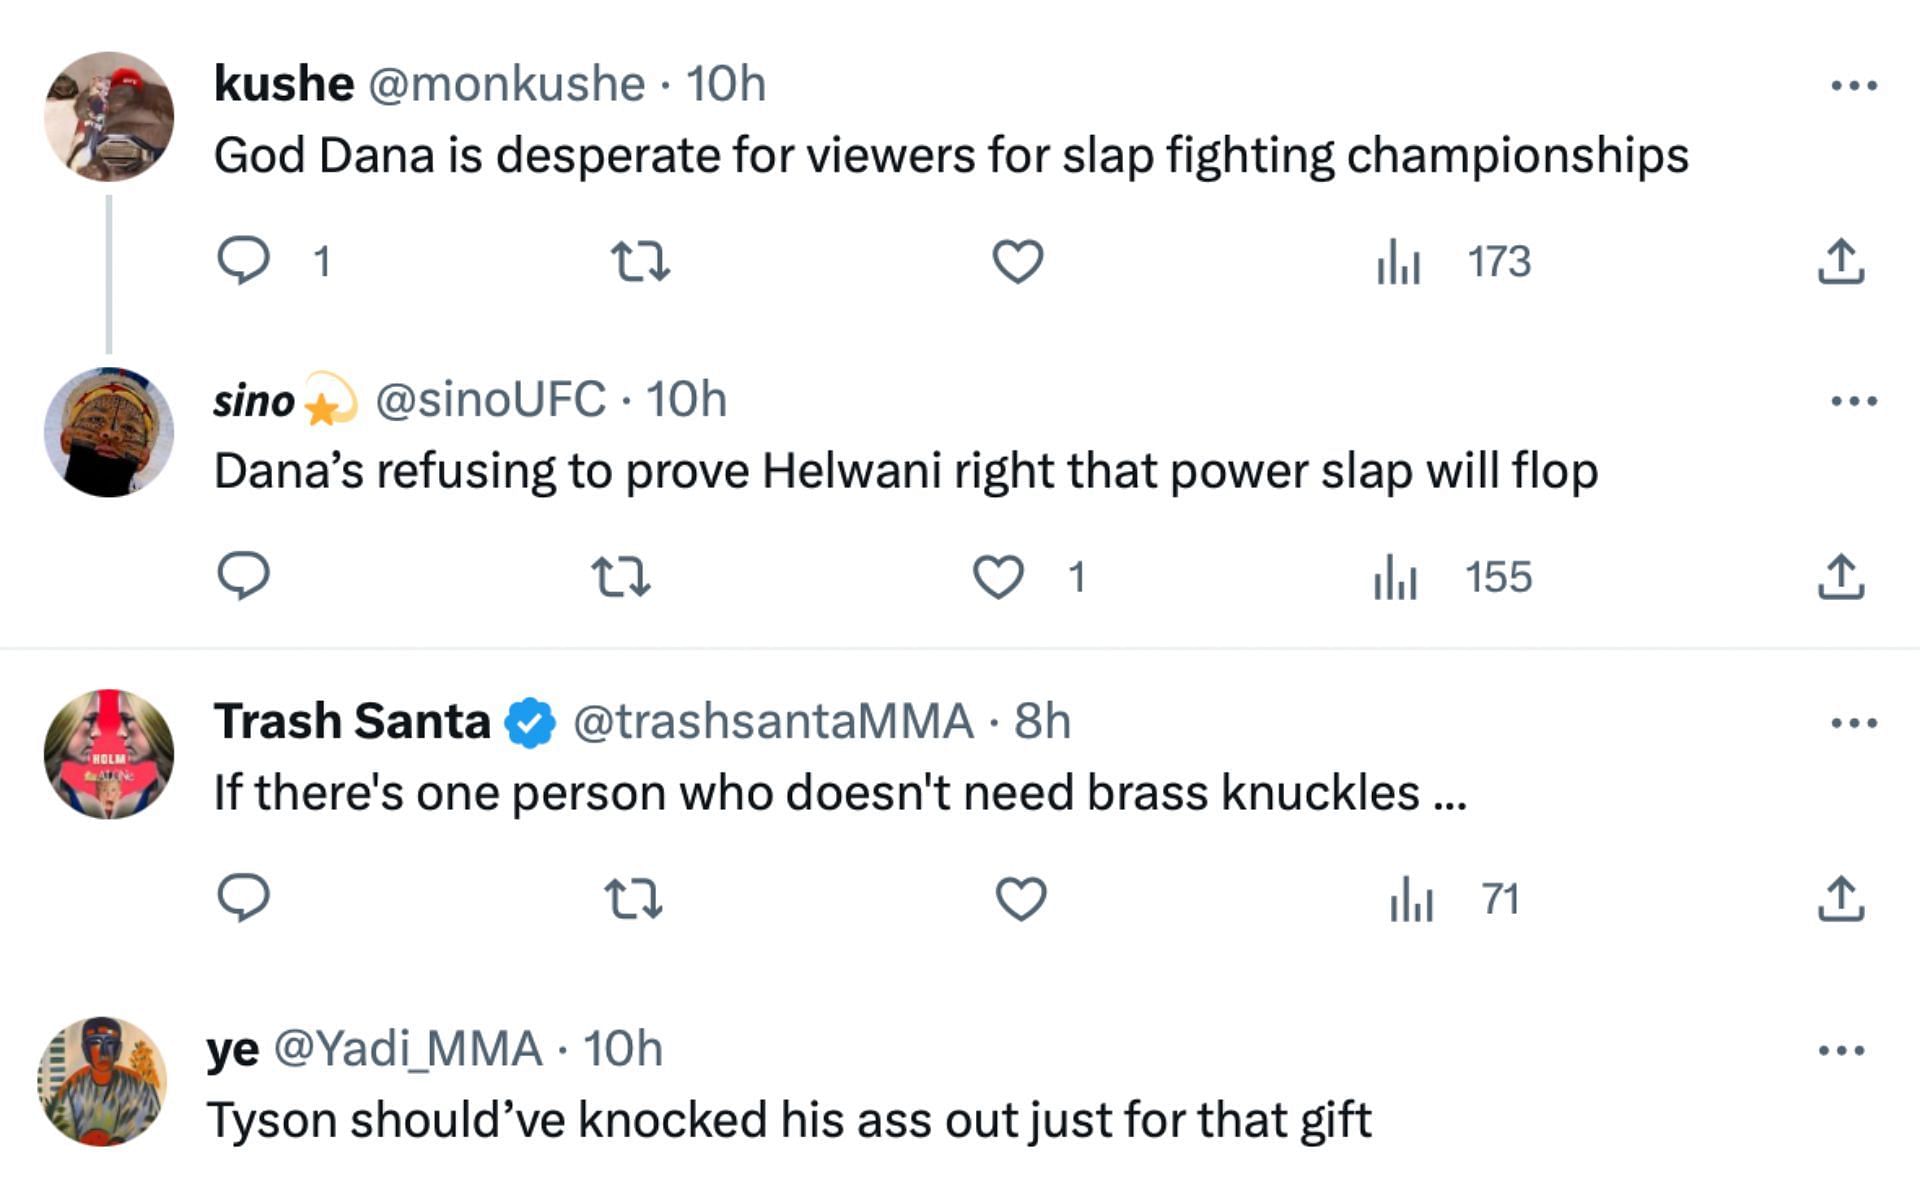 Fans react to Mike Tyson&#039;s gift from the UFC president. [via Twitter]